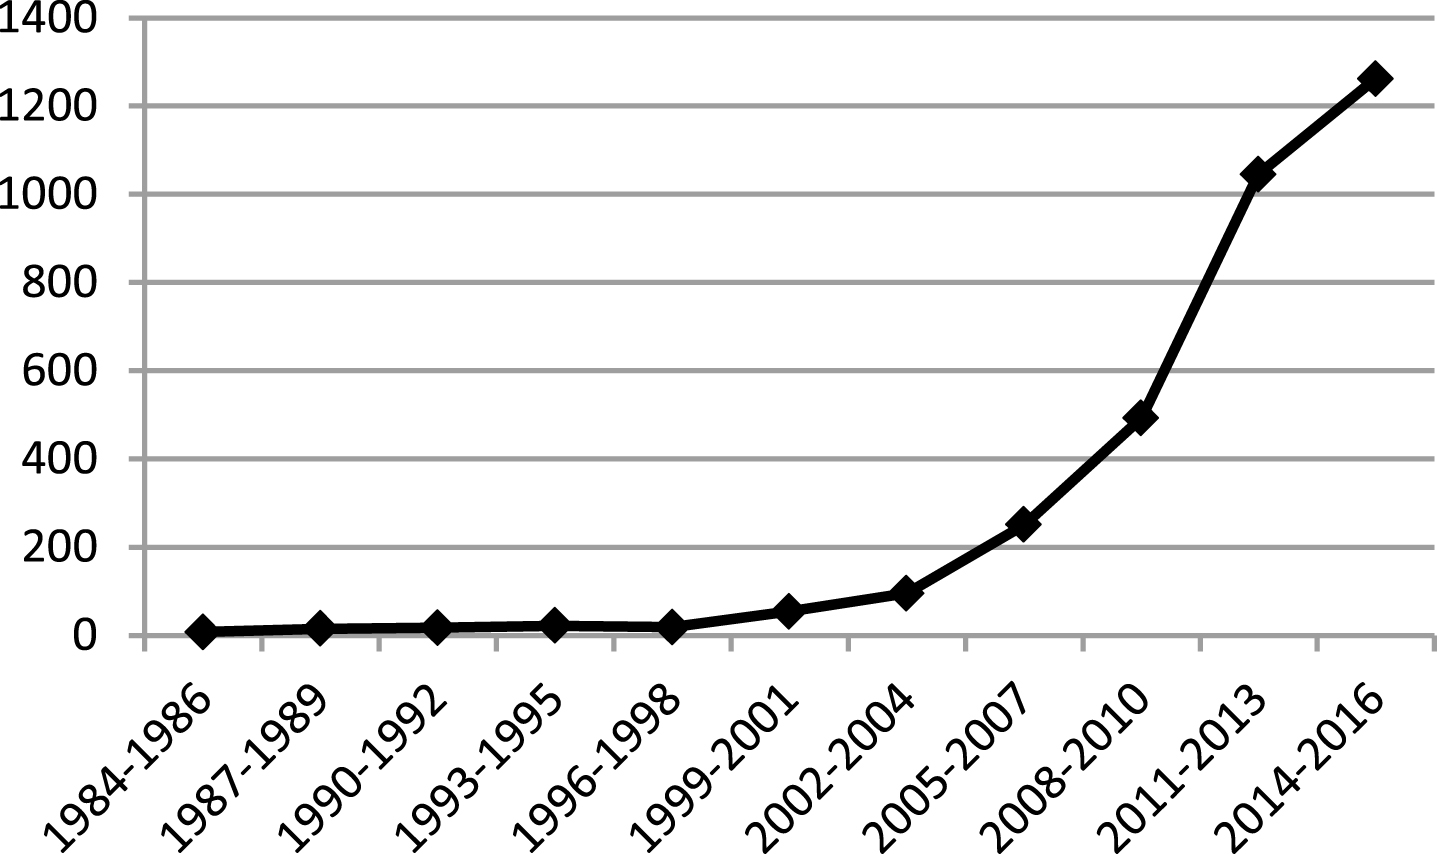 Number of Publications with Keywords “Robotics” and “Rehabilitation” on ClinicalTrials.gov by Year.